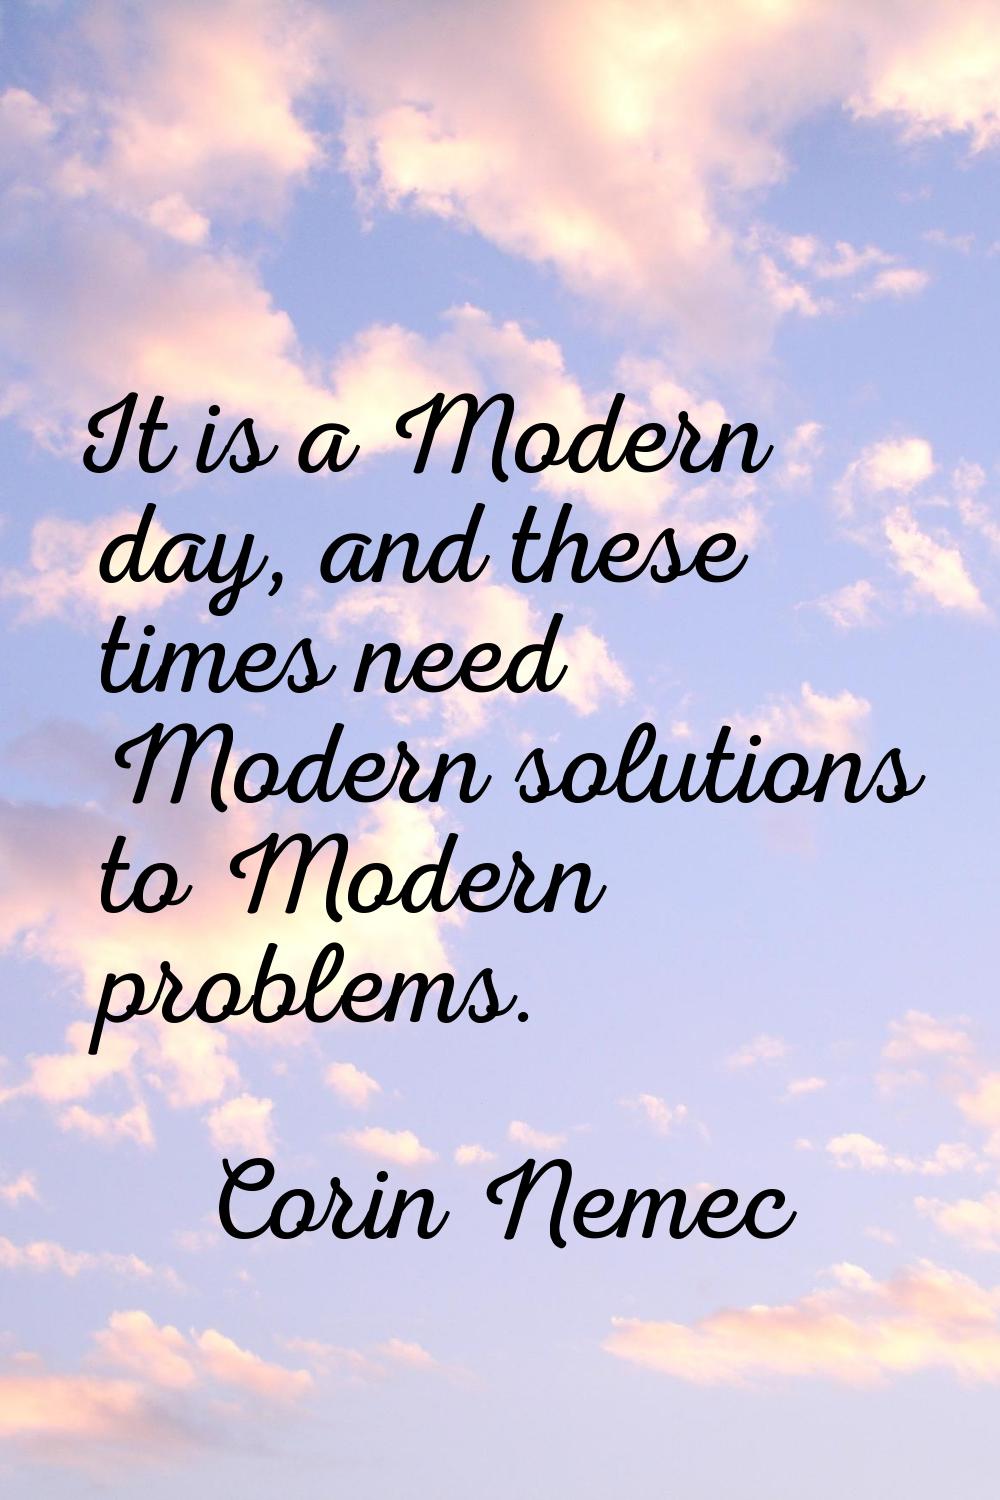 It is a Modern day, and these times need Modern solutions to Modern problems.